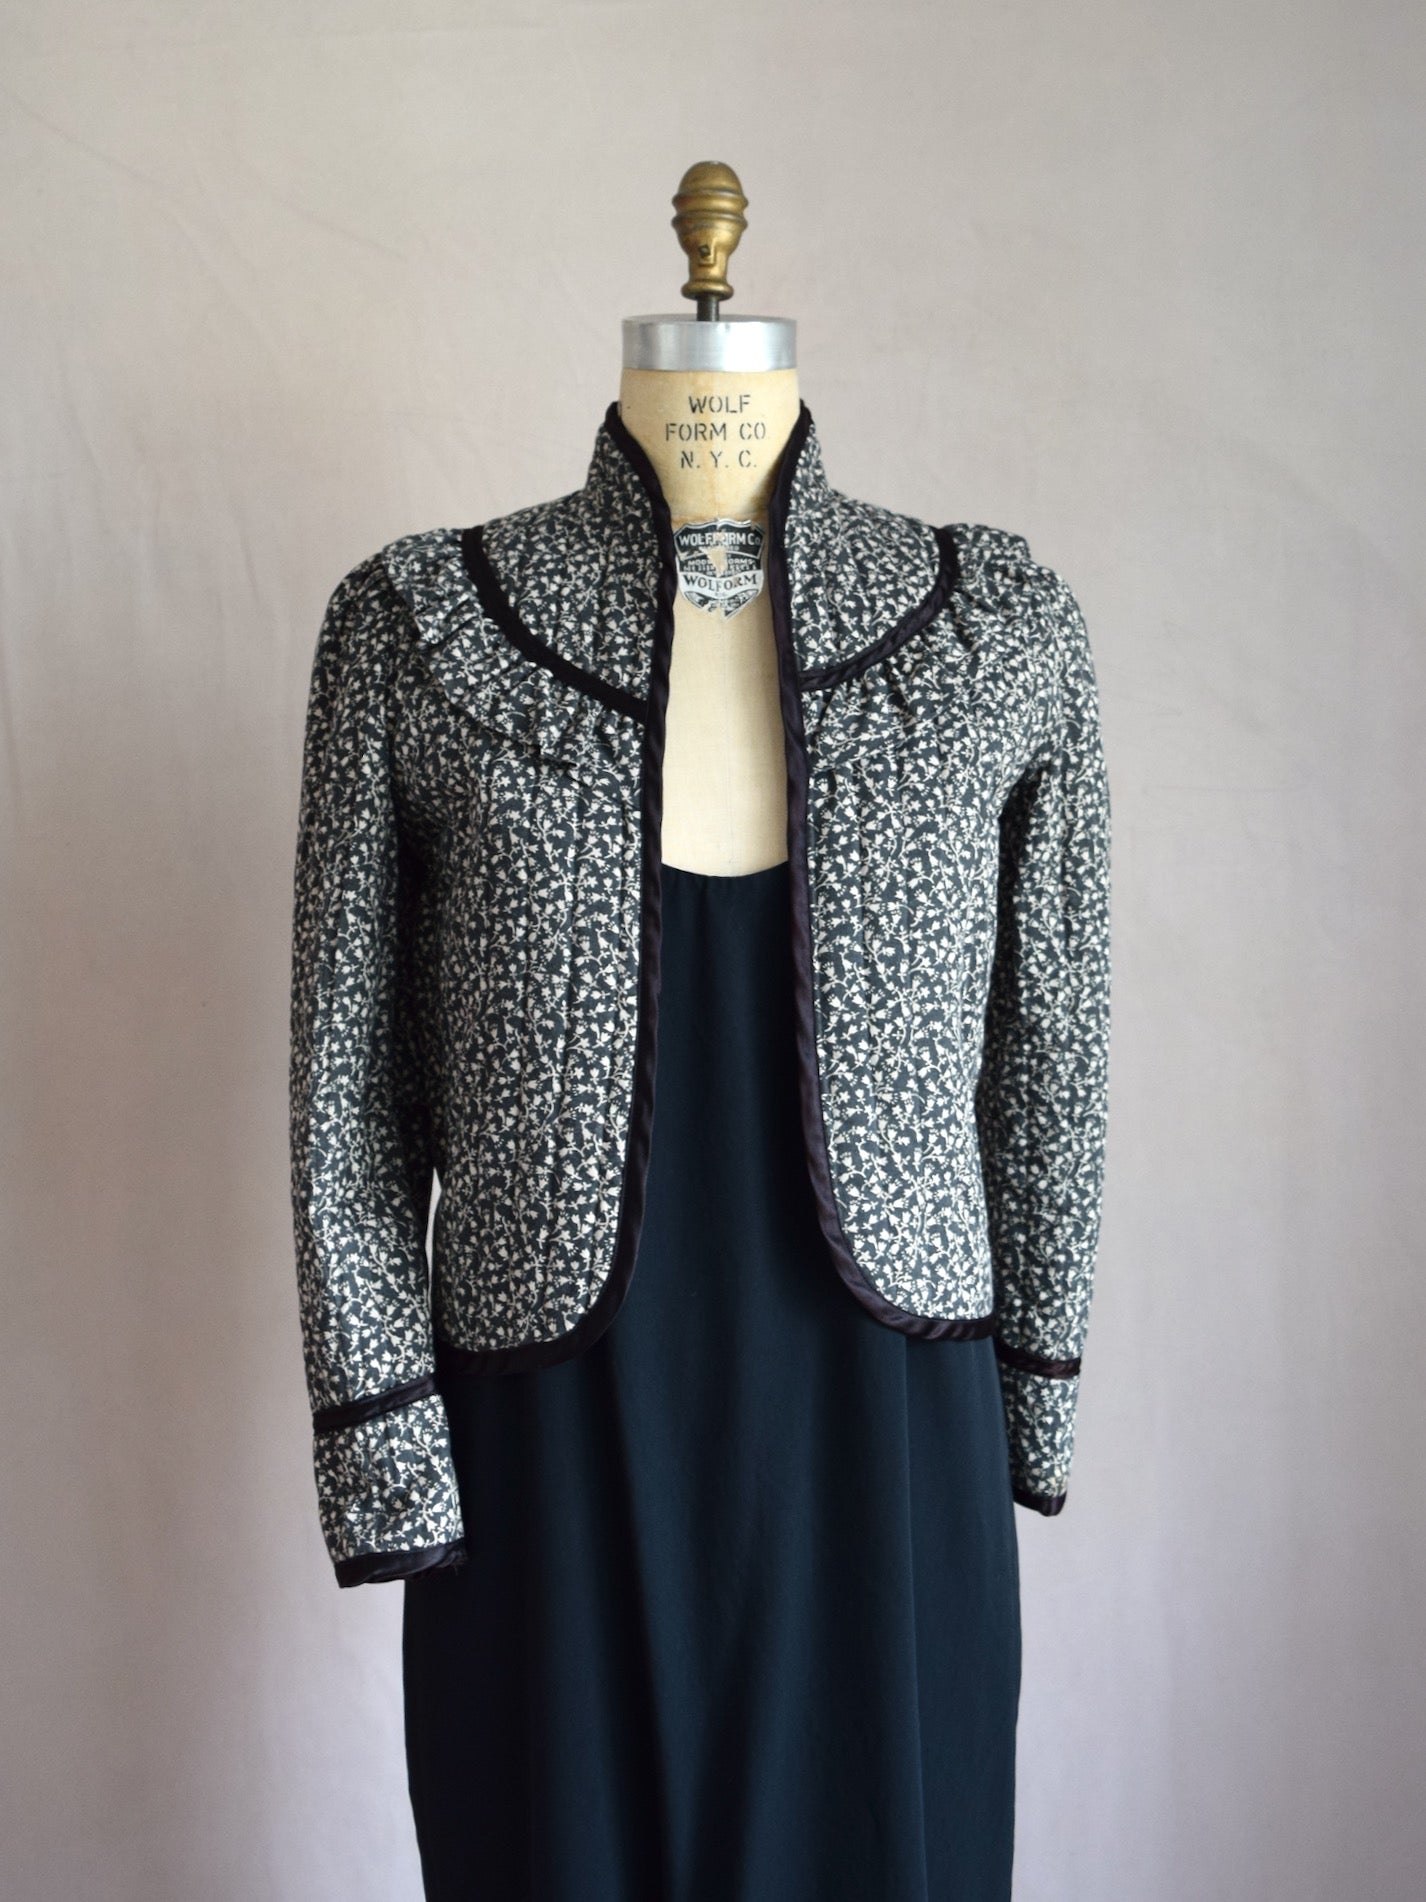 Vintage 1970s black and white calico print quilted jacket